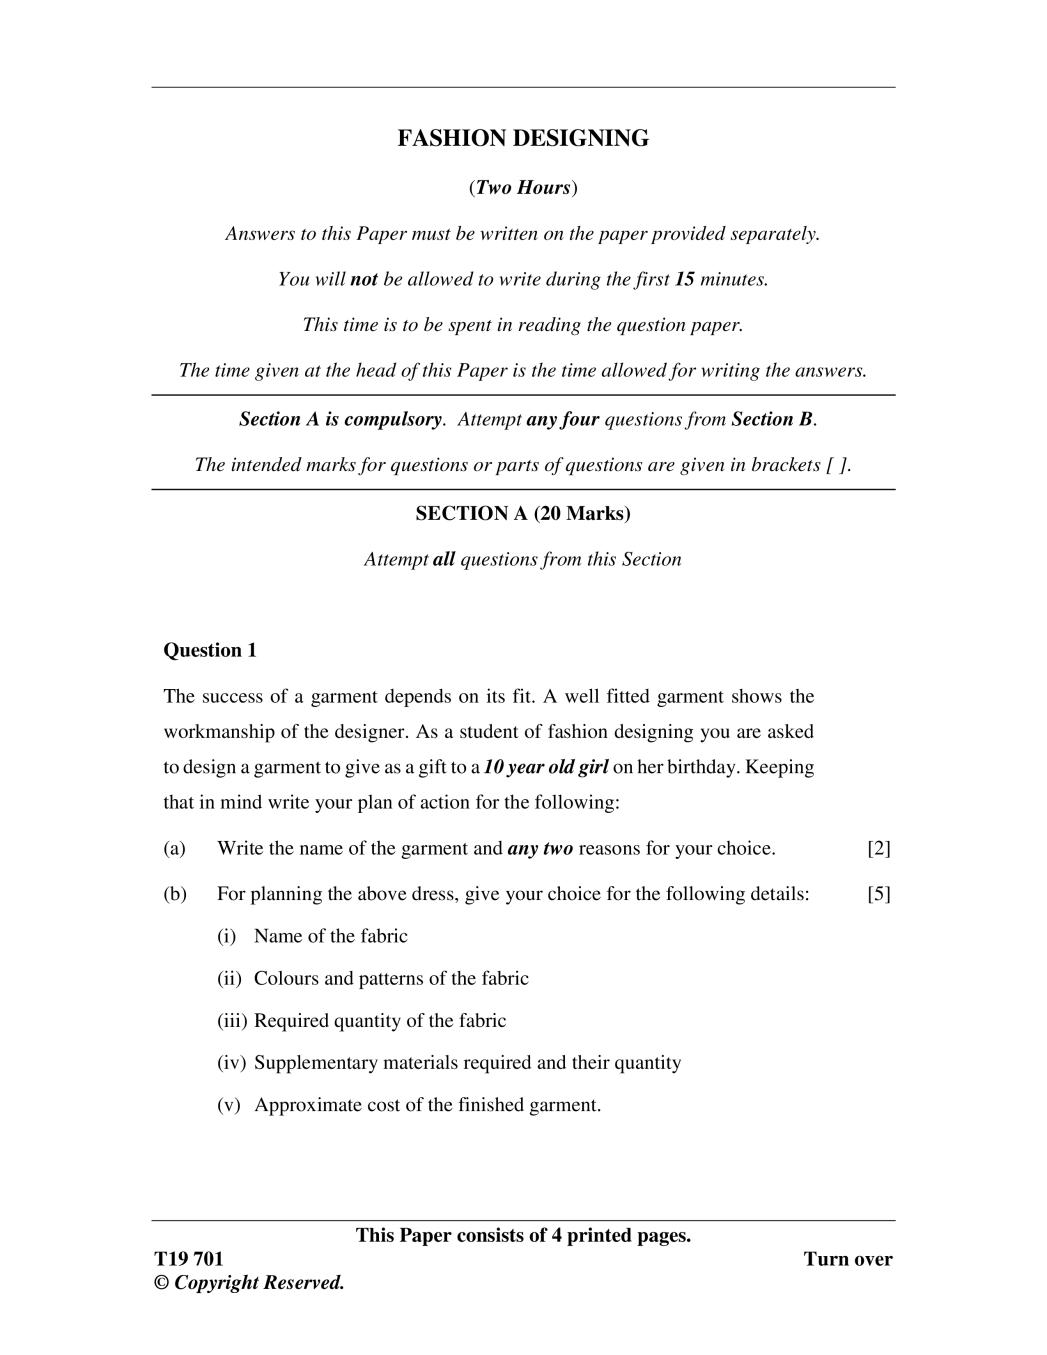 ICSE Class 10 Question Paper 2019 for Fashion Designing  - Page 1